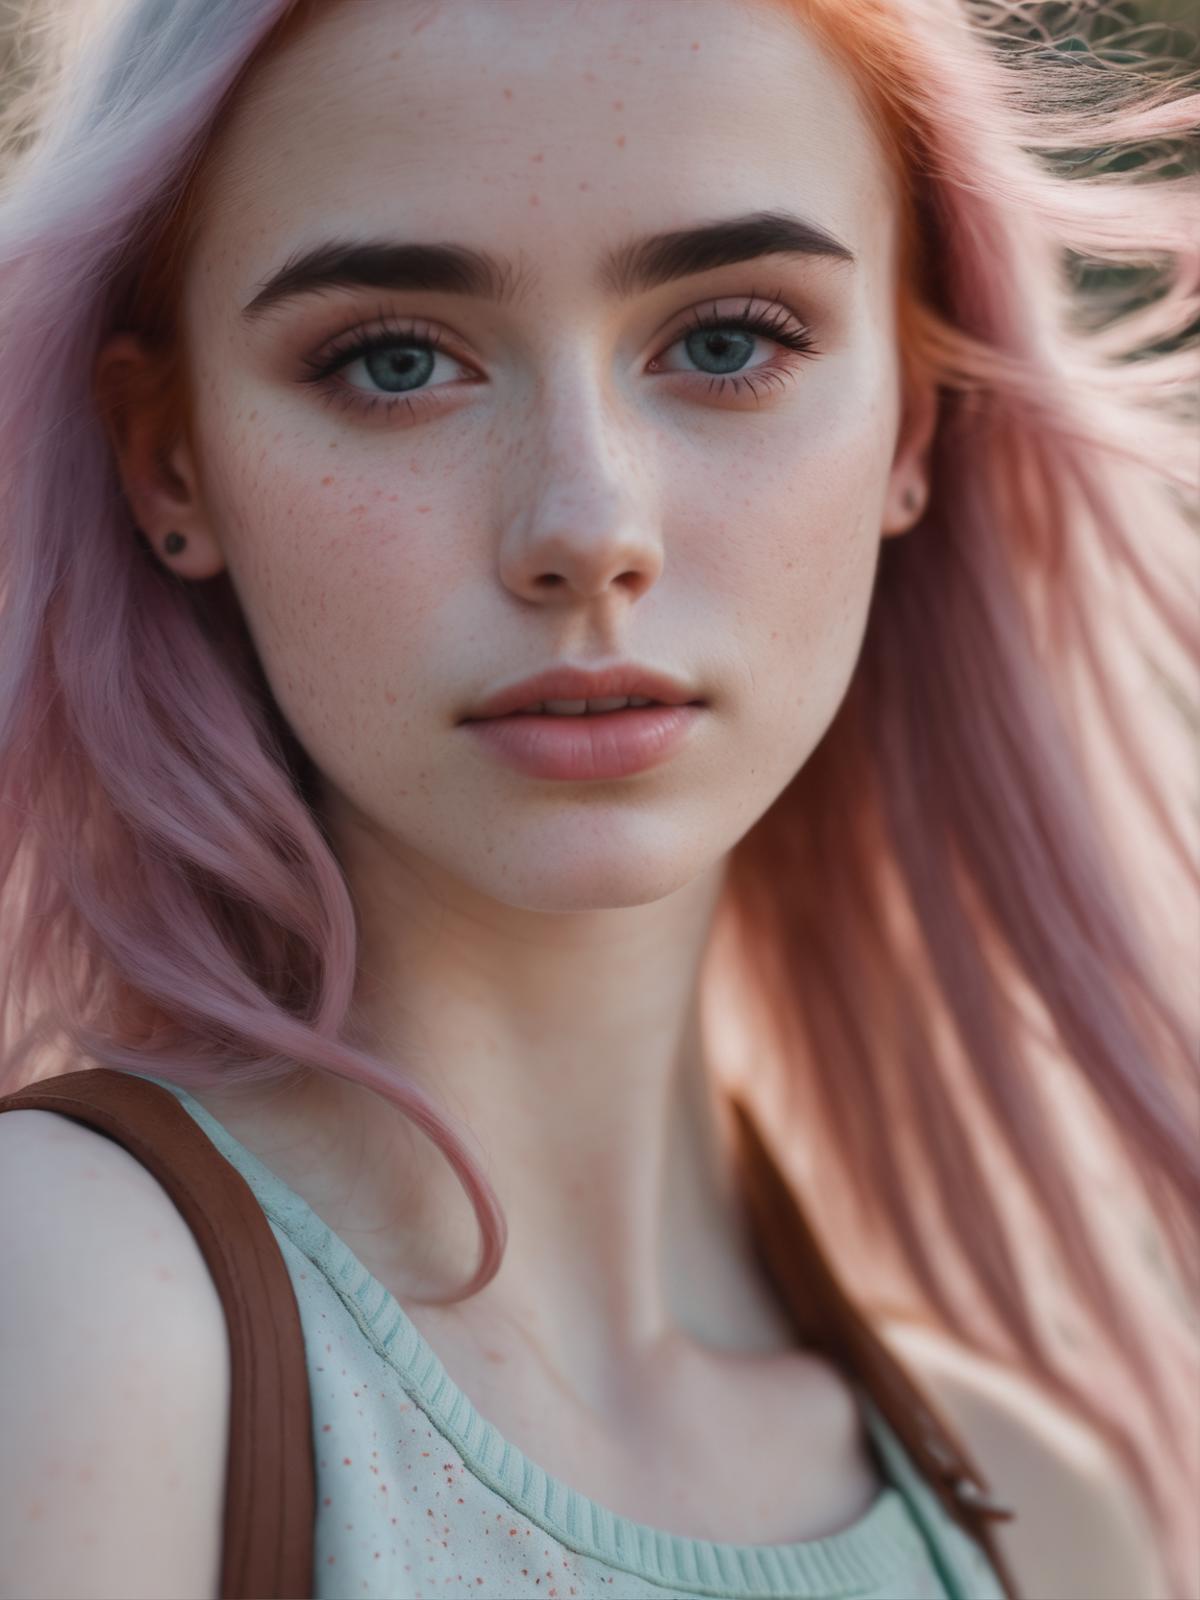 Lily Jane Collins image by gattaplayer